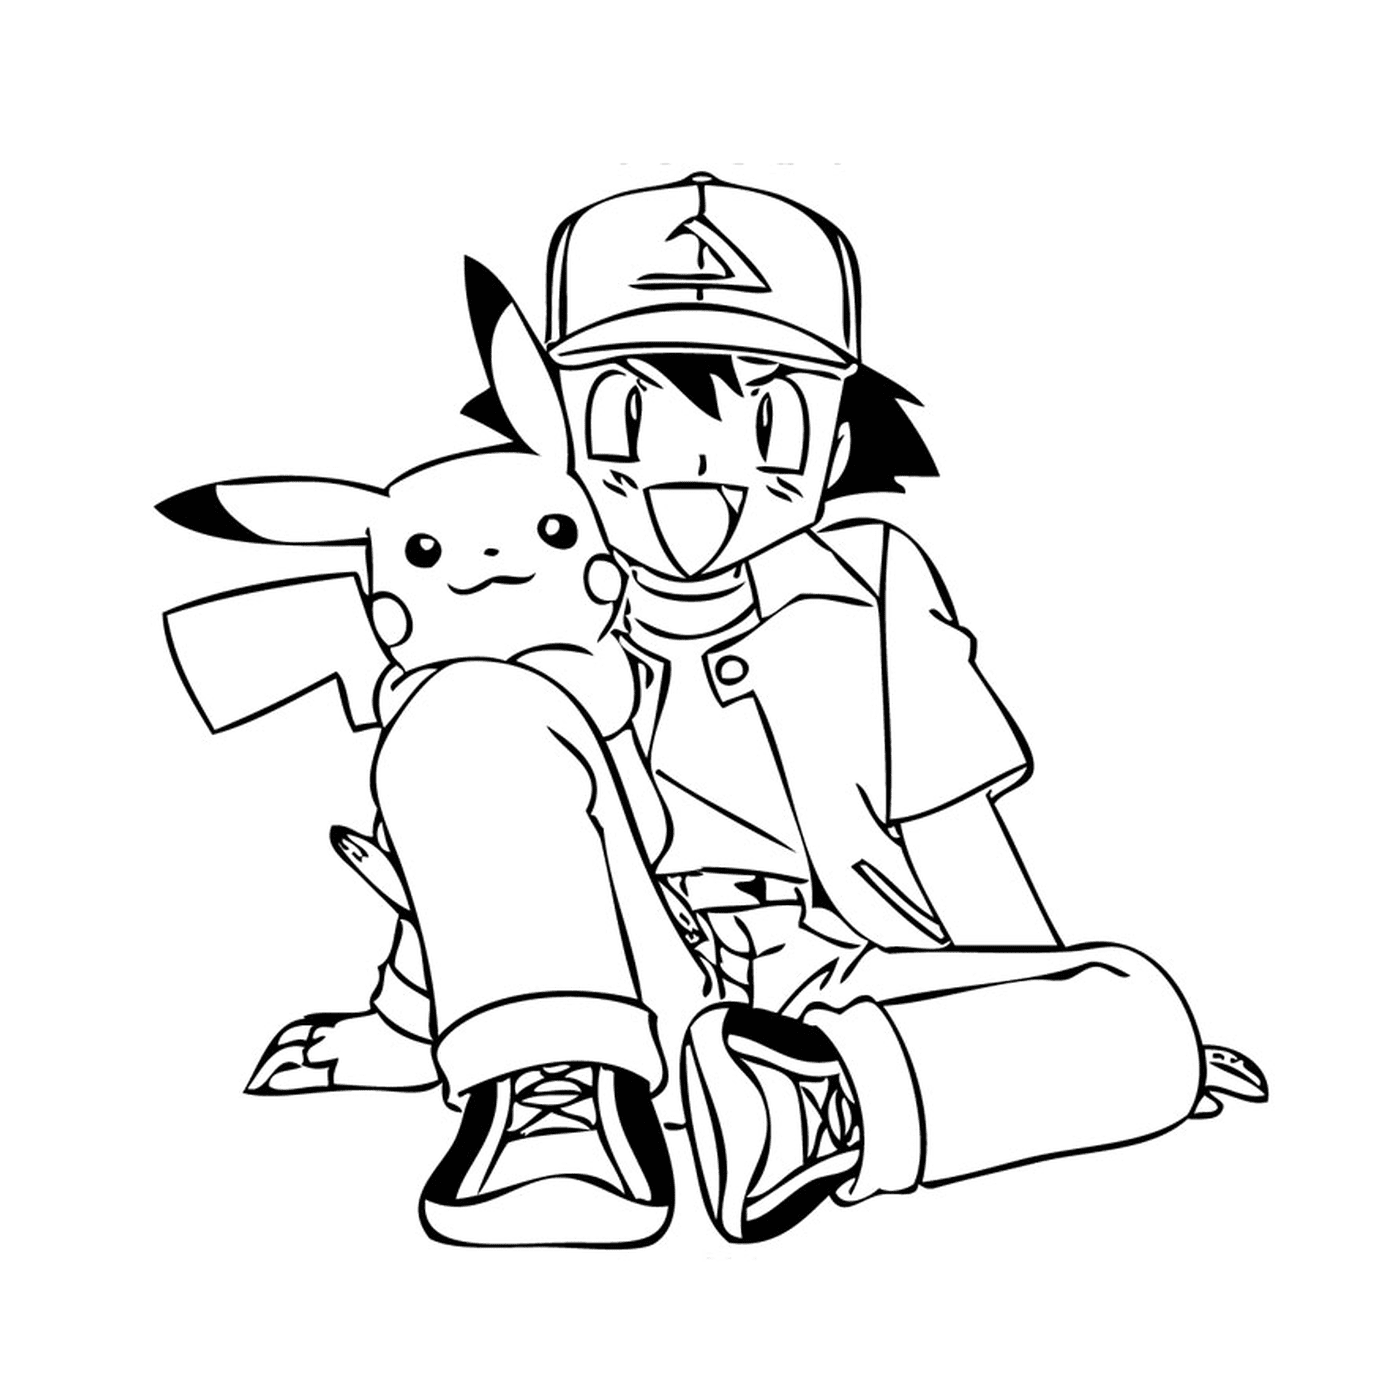  A person sitting on the floor with a Pikachu 